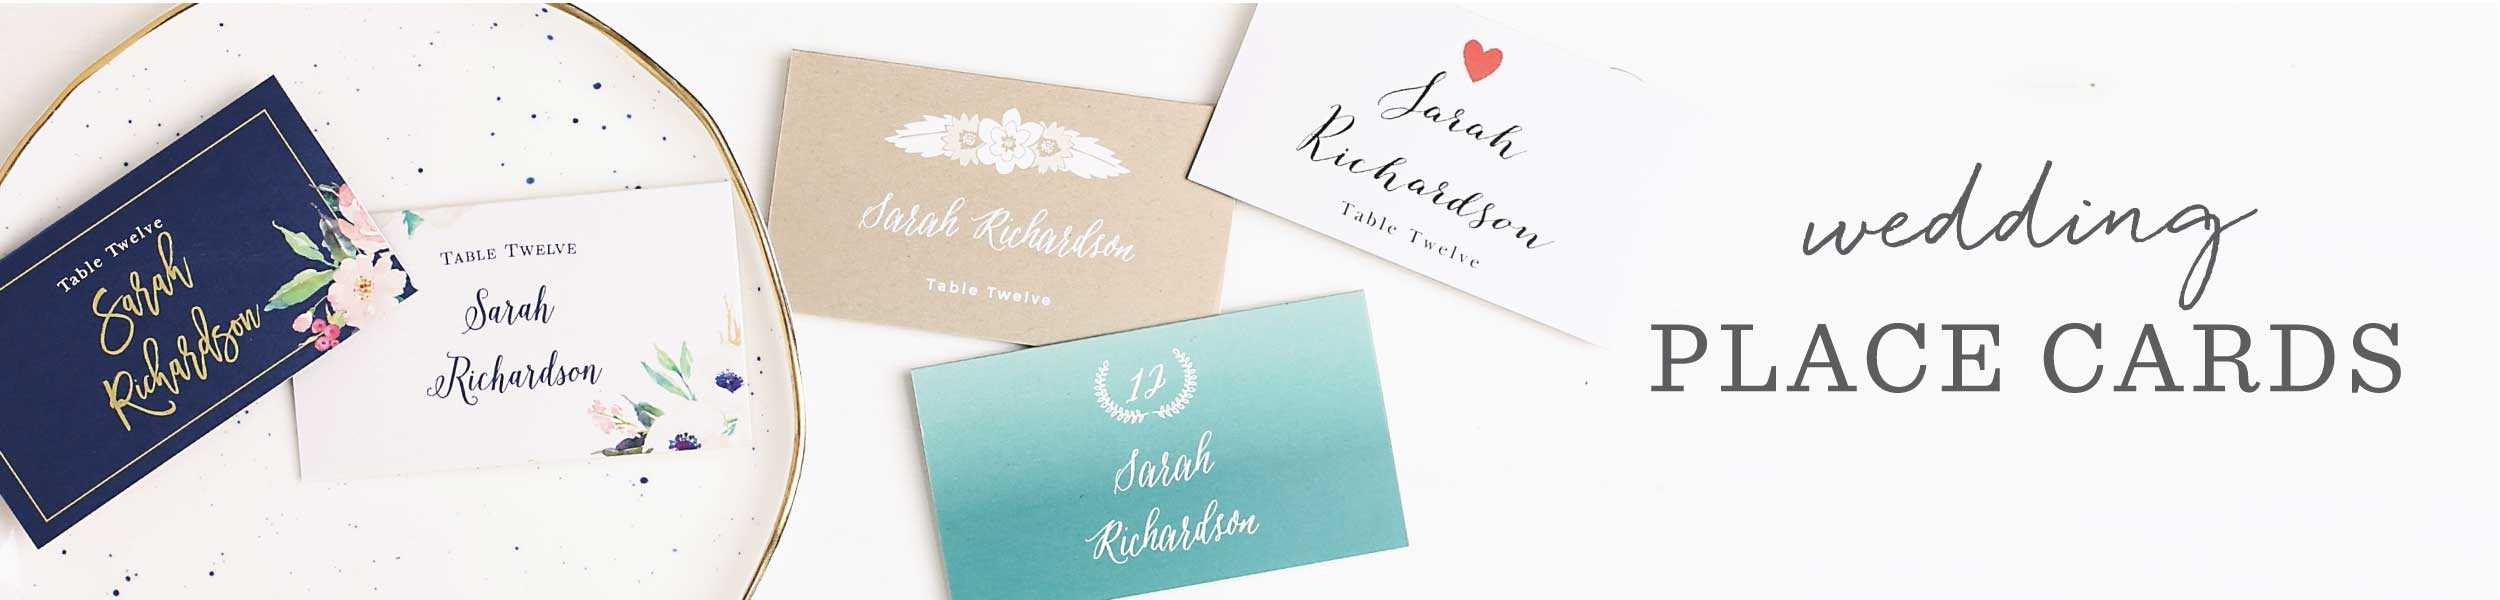 Redwood Forest Place Cards Regarding Wedding Place Card Template Free Word